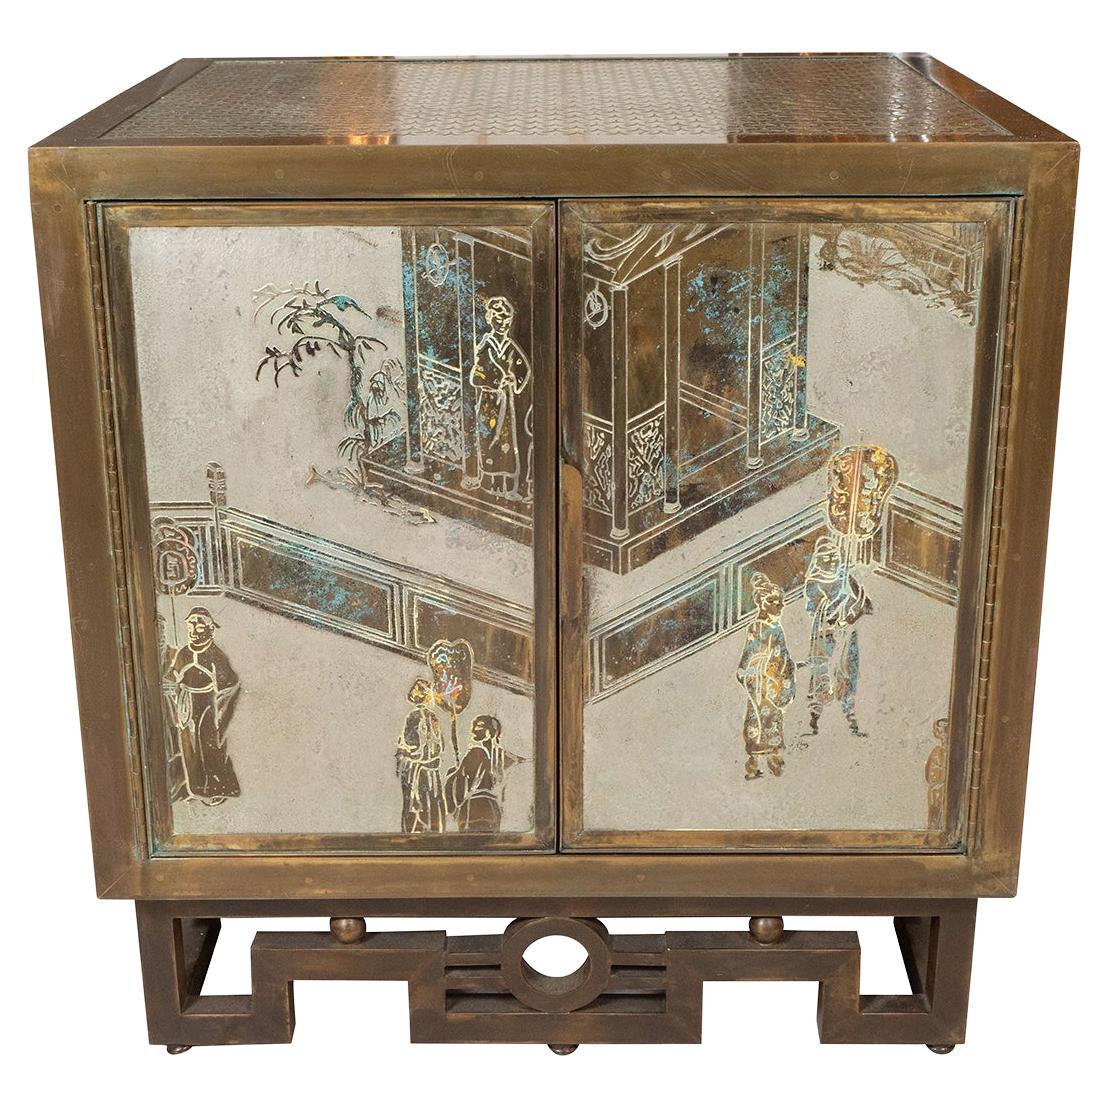 Rare Bronze and Pewter "Chan" Design Cabinet by Philip and Kelvin LaVerne